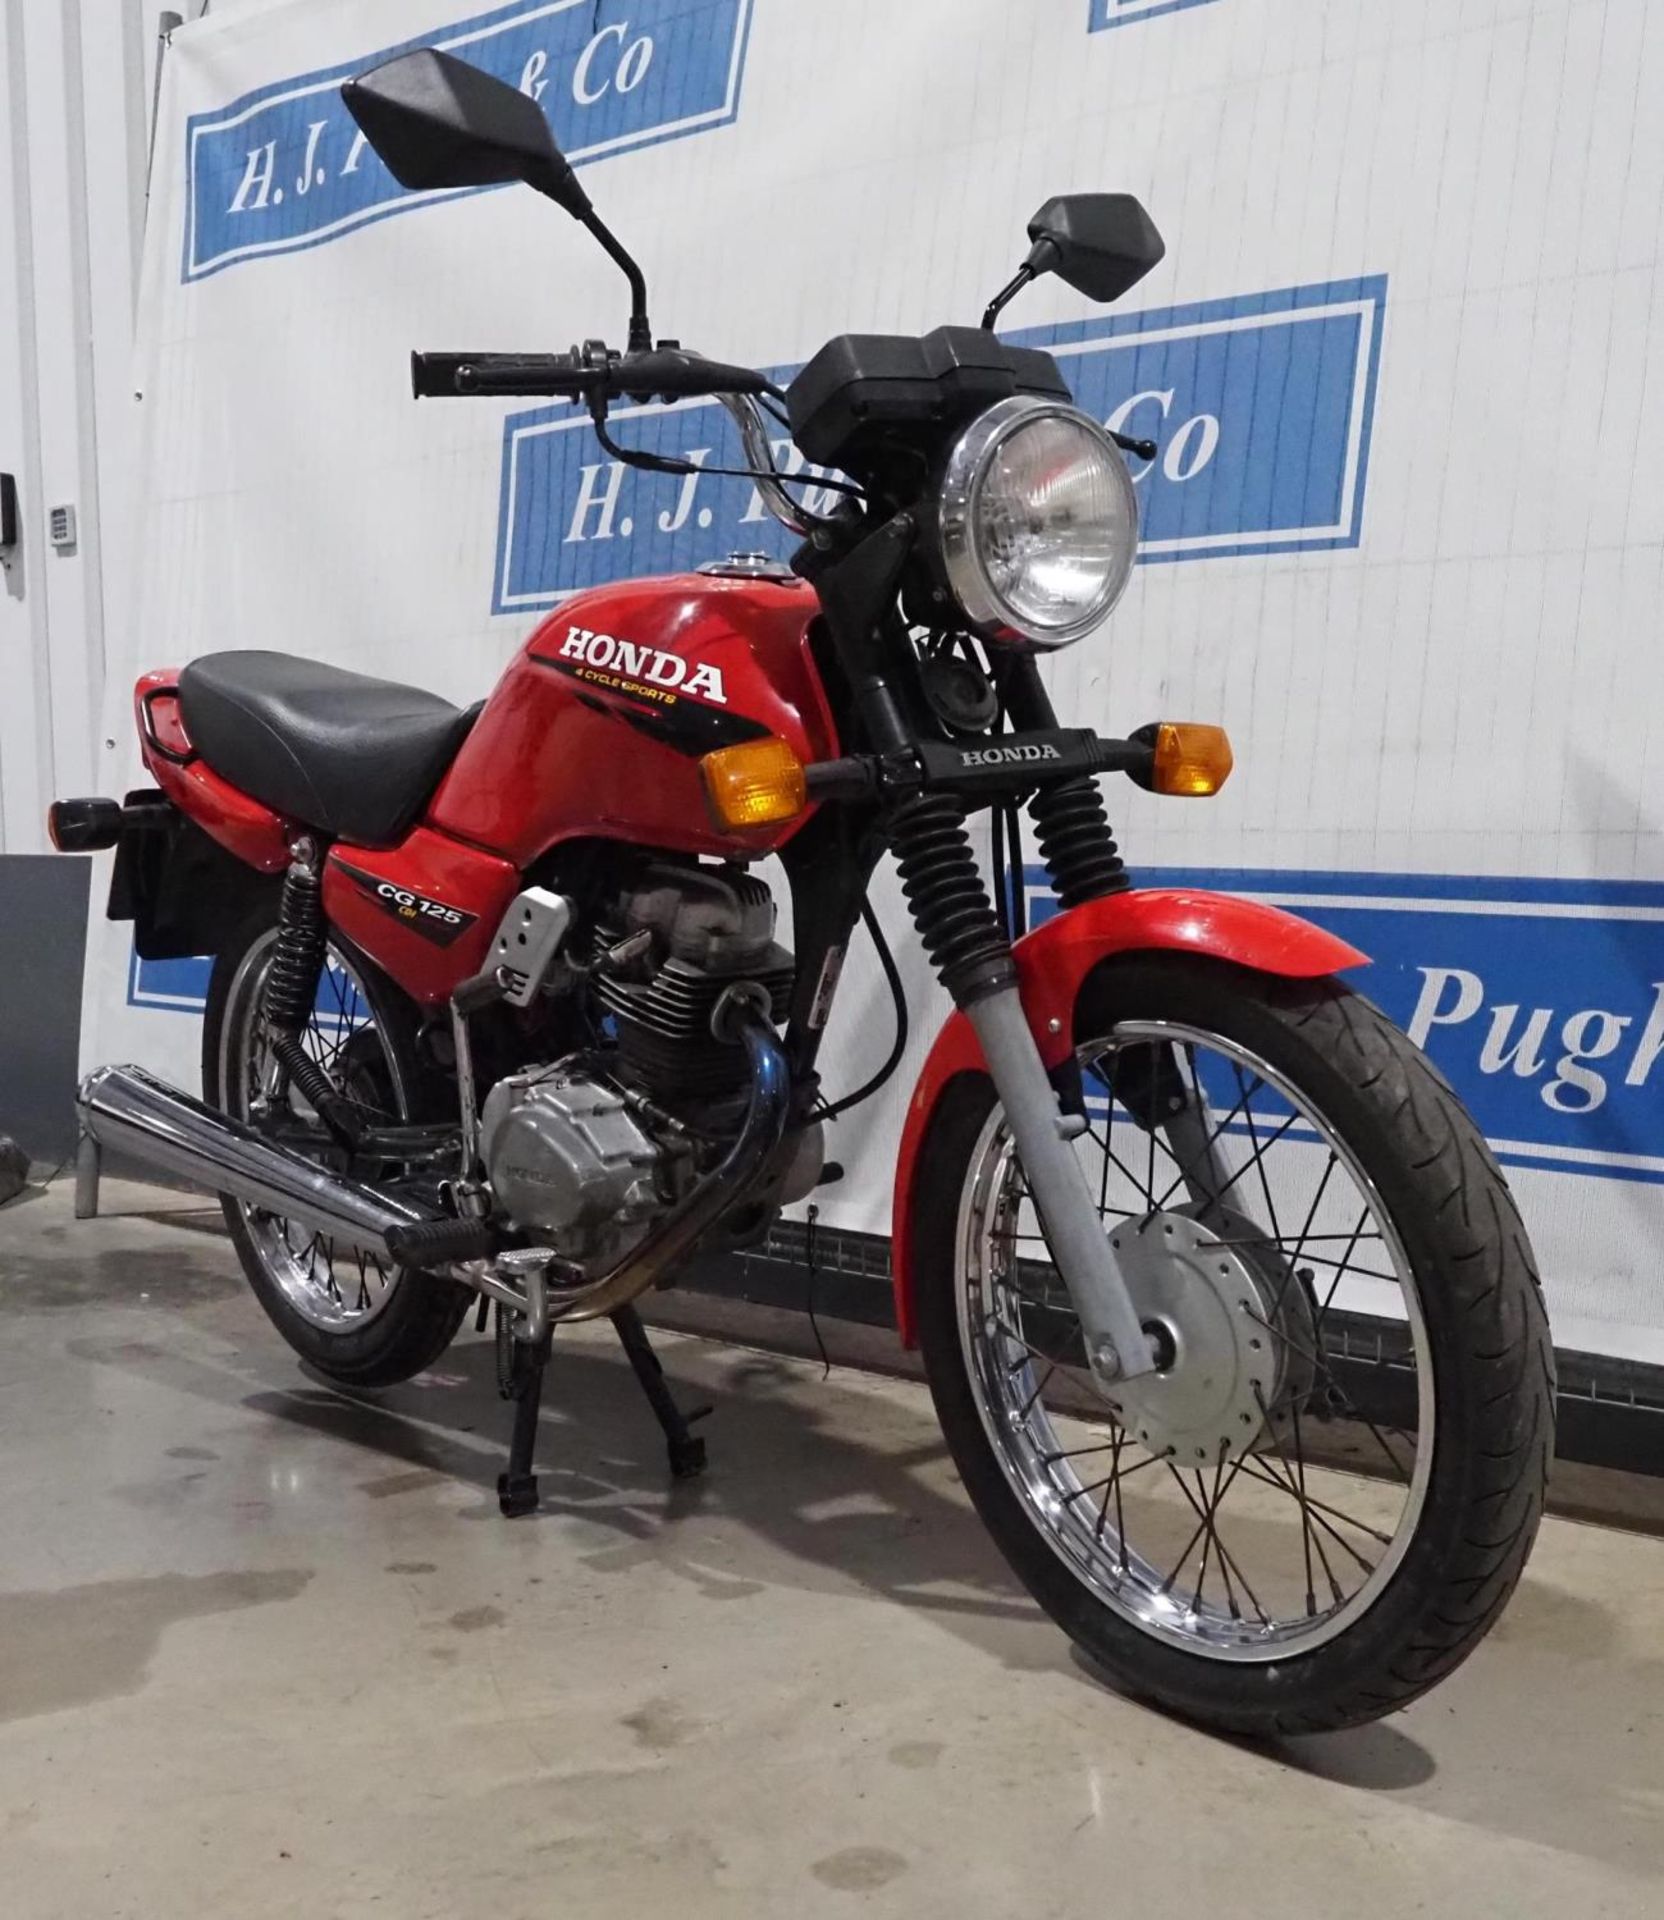 Honda CG125 motorcycle. 1998. 124cc. MOT until 27.03.2023. Starts and runs. Engine number does not - Image 4 of 6